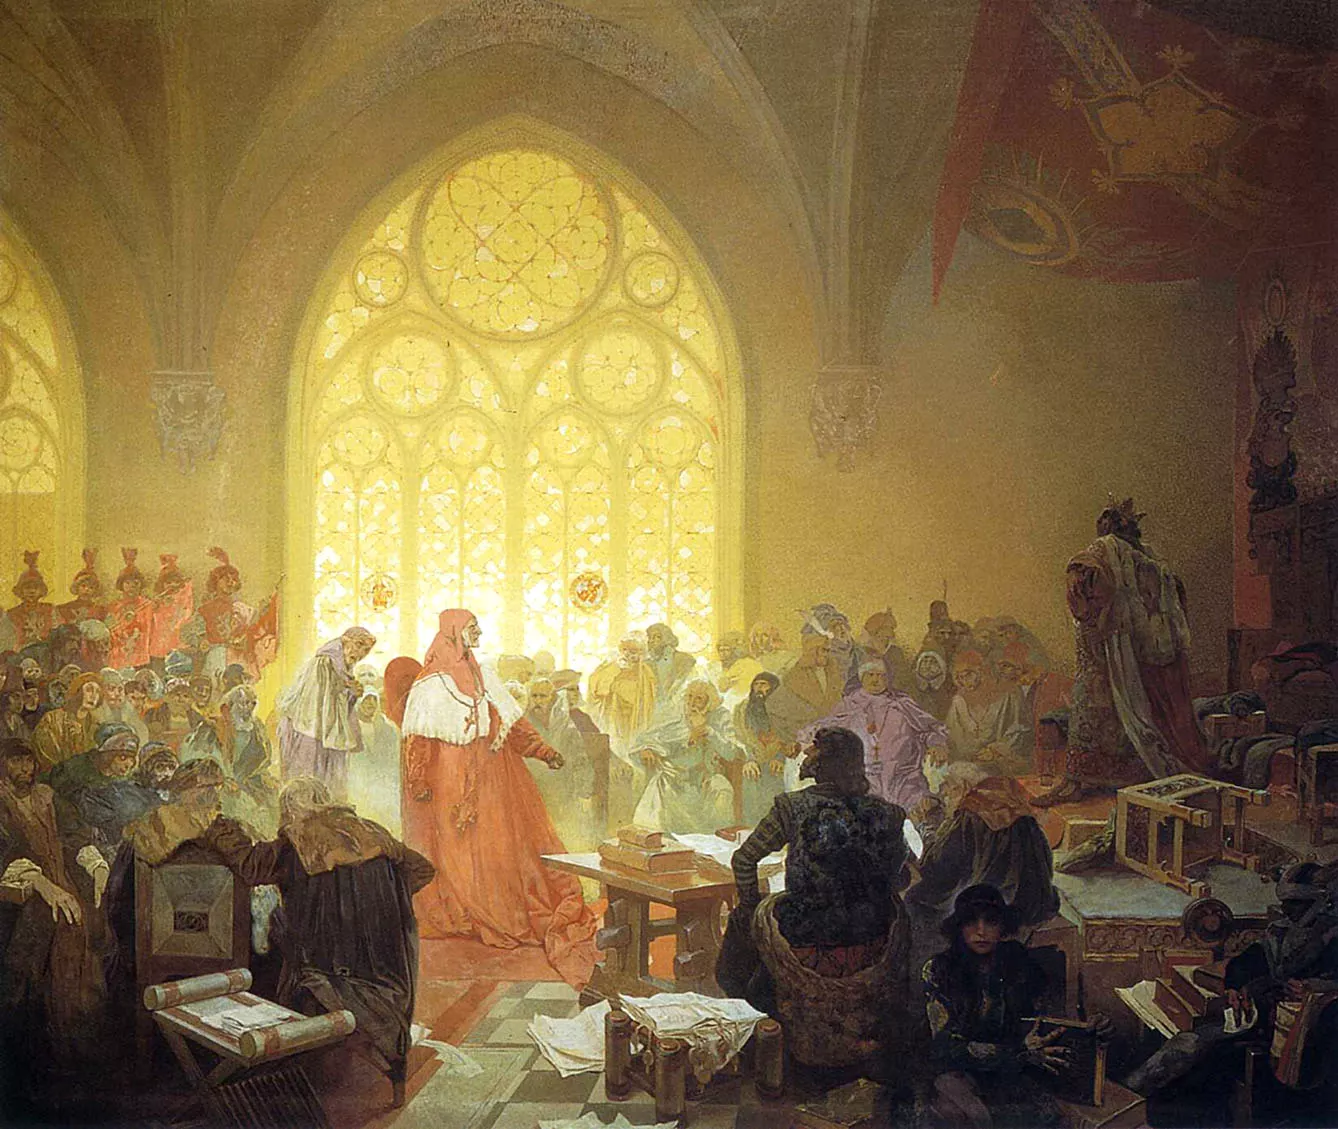 A painting by Alphonse Mucha showing the first Hussite king, George of Podebrady.